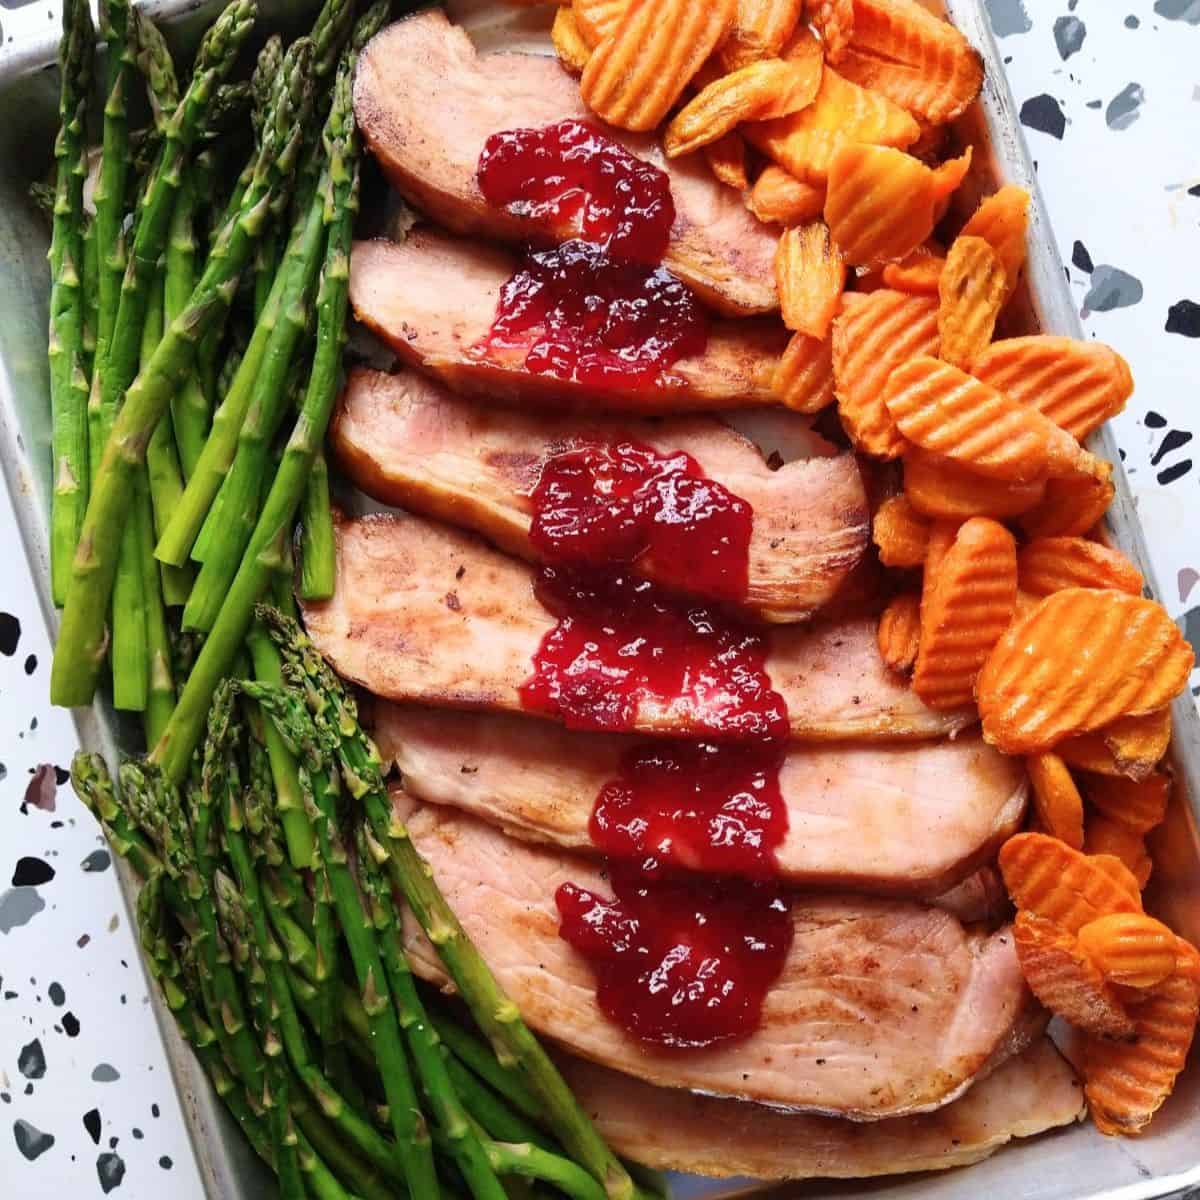 A sheet pan with asparagus, ham with glaze, and crinkled cut carrots.